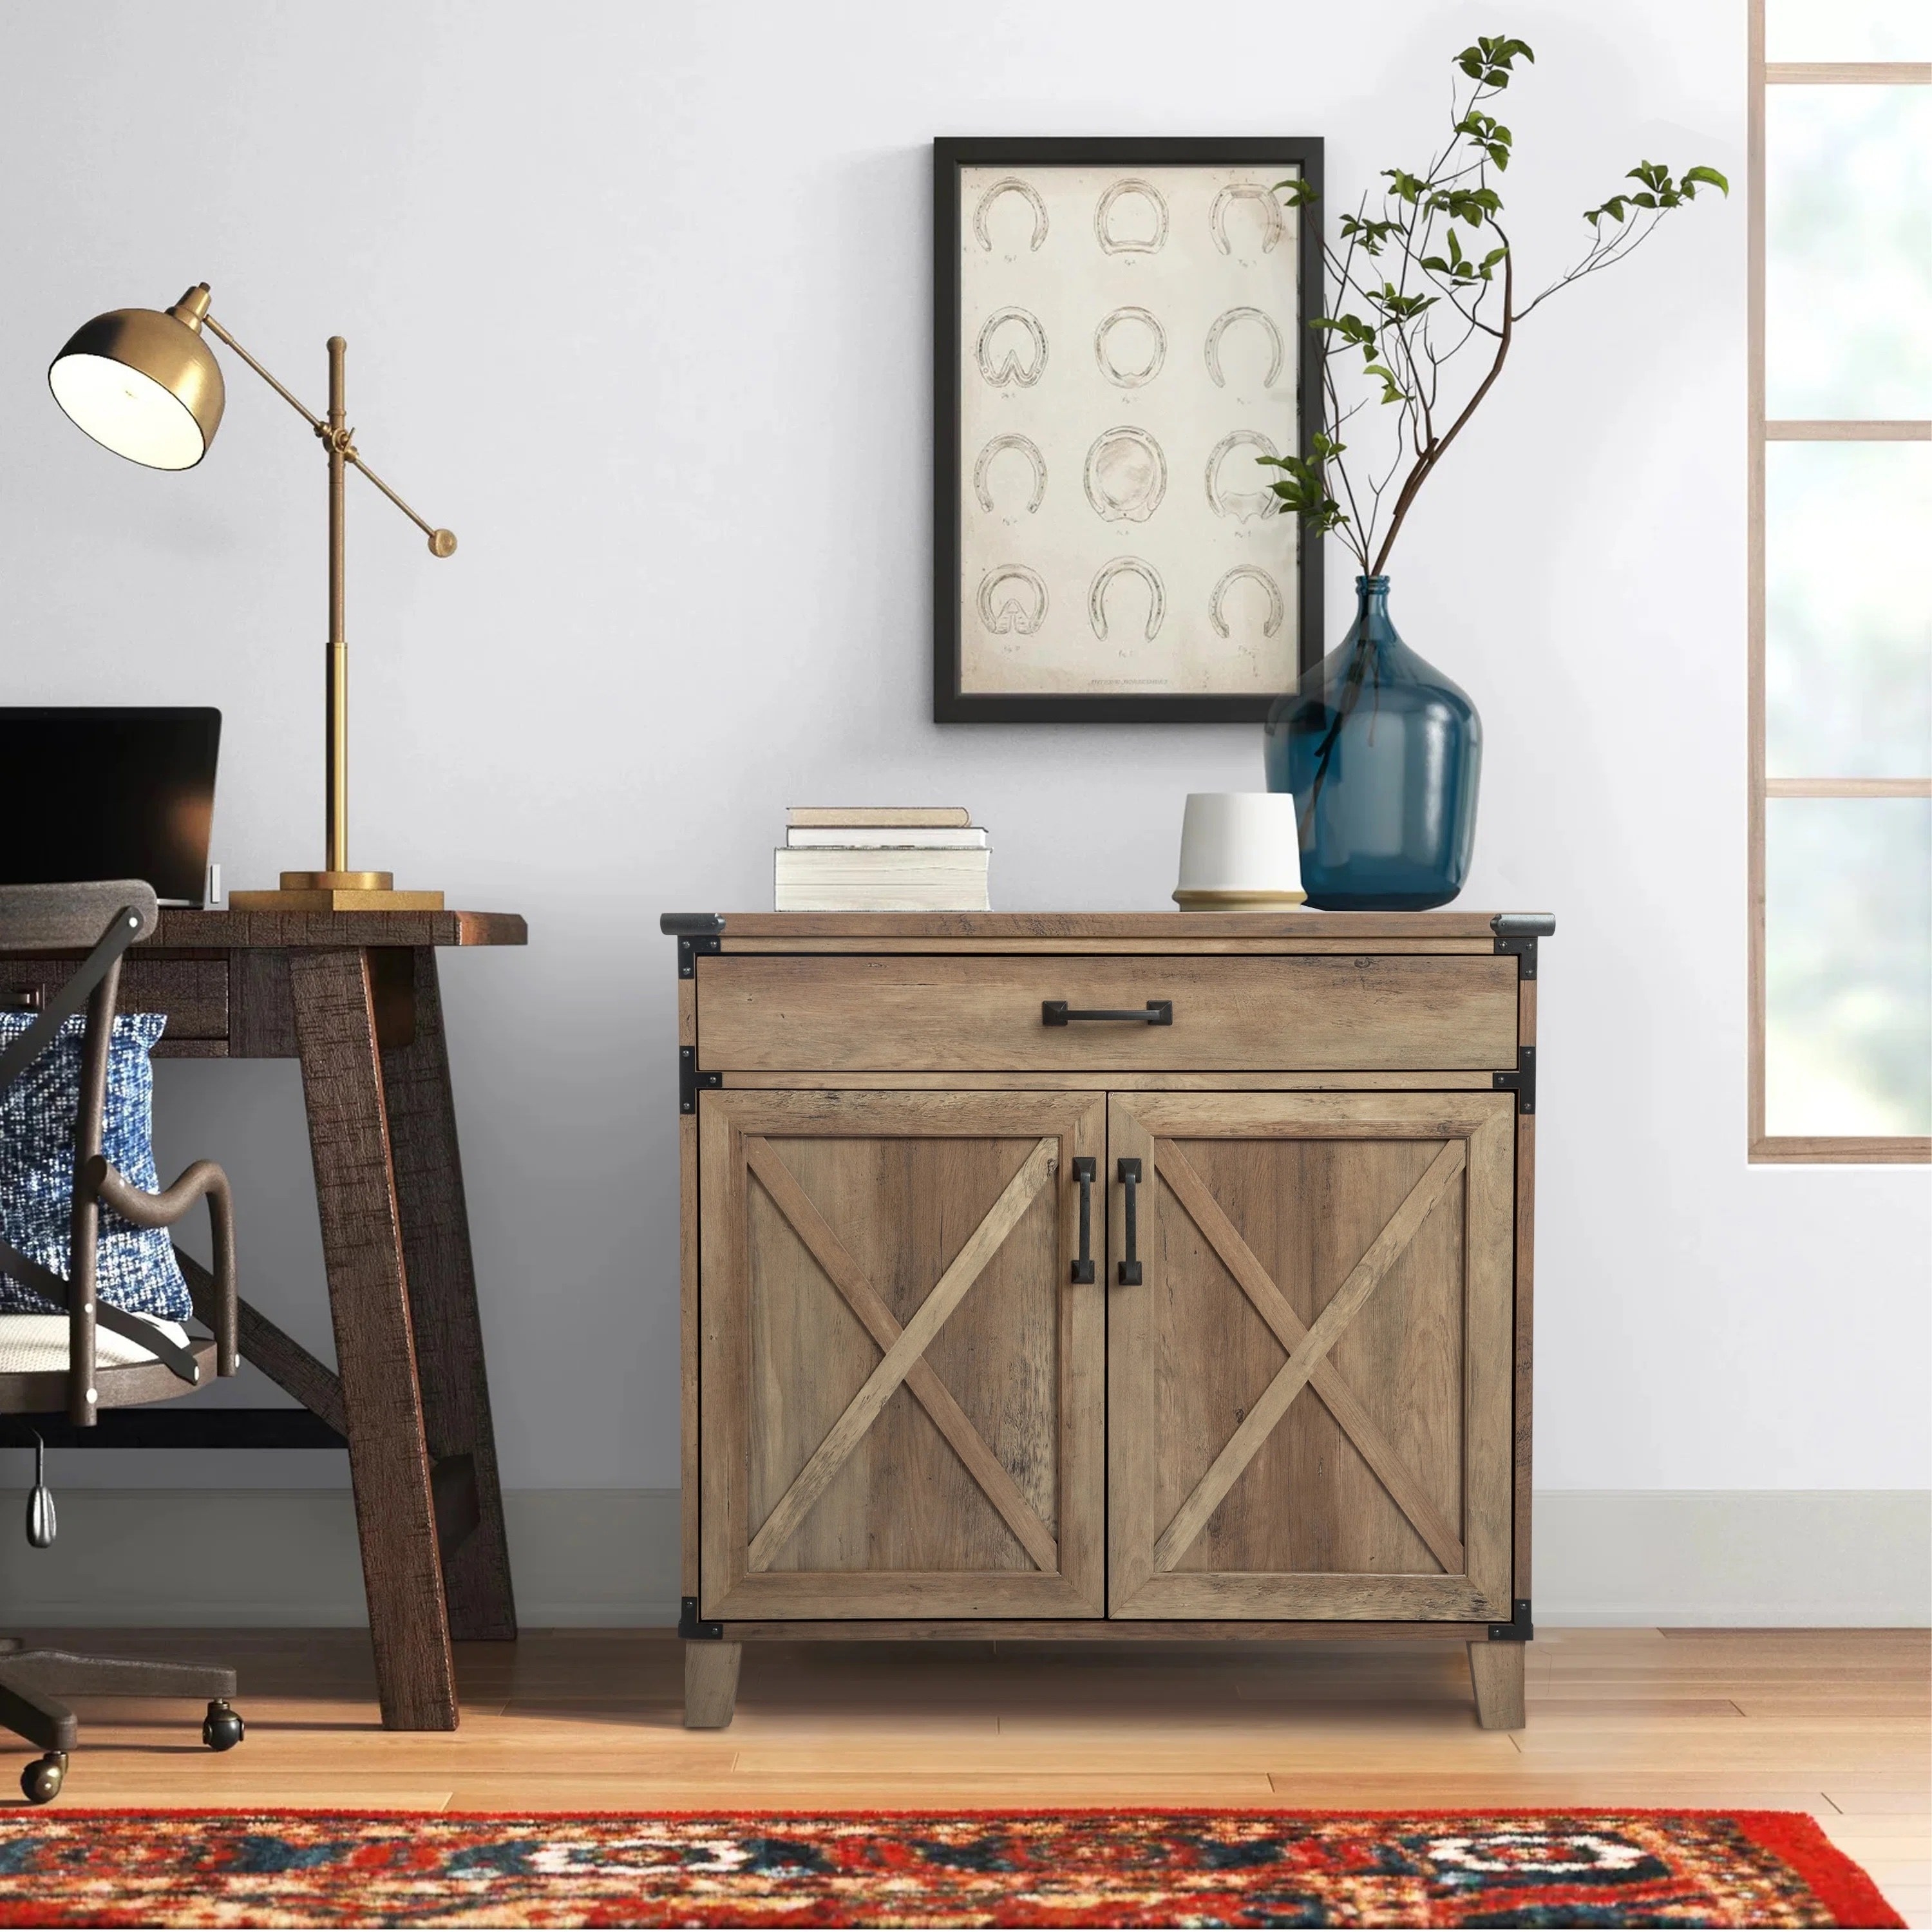 a rustic storage cabinet in a living room/home office